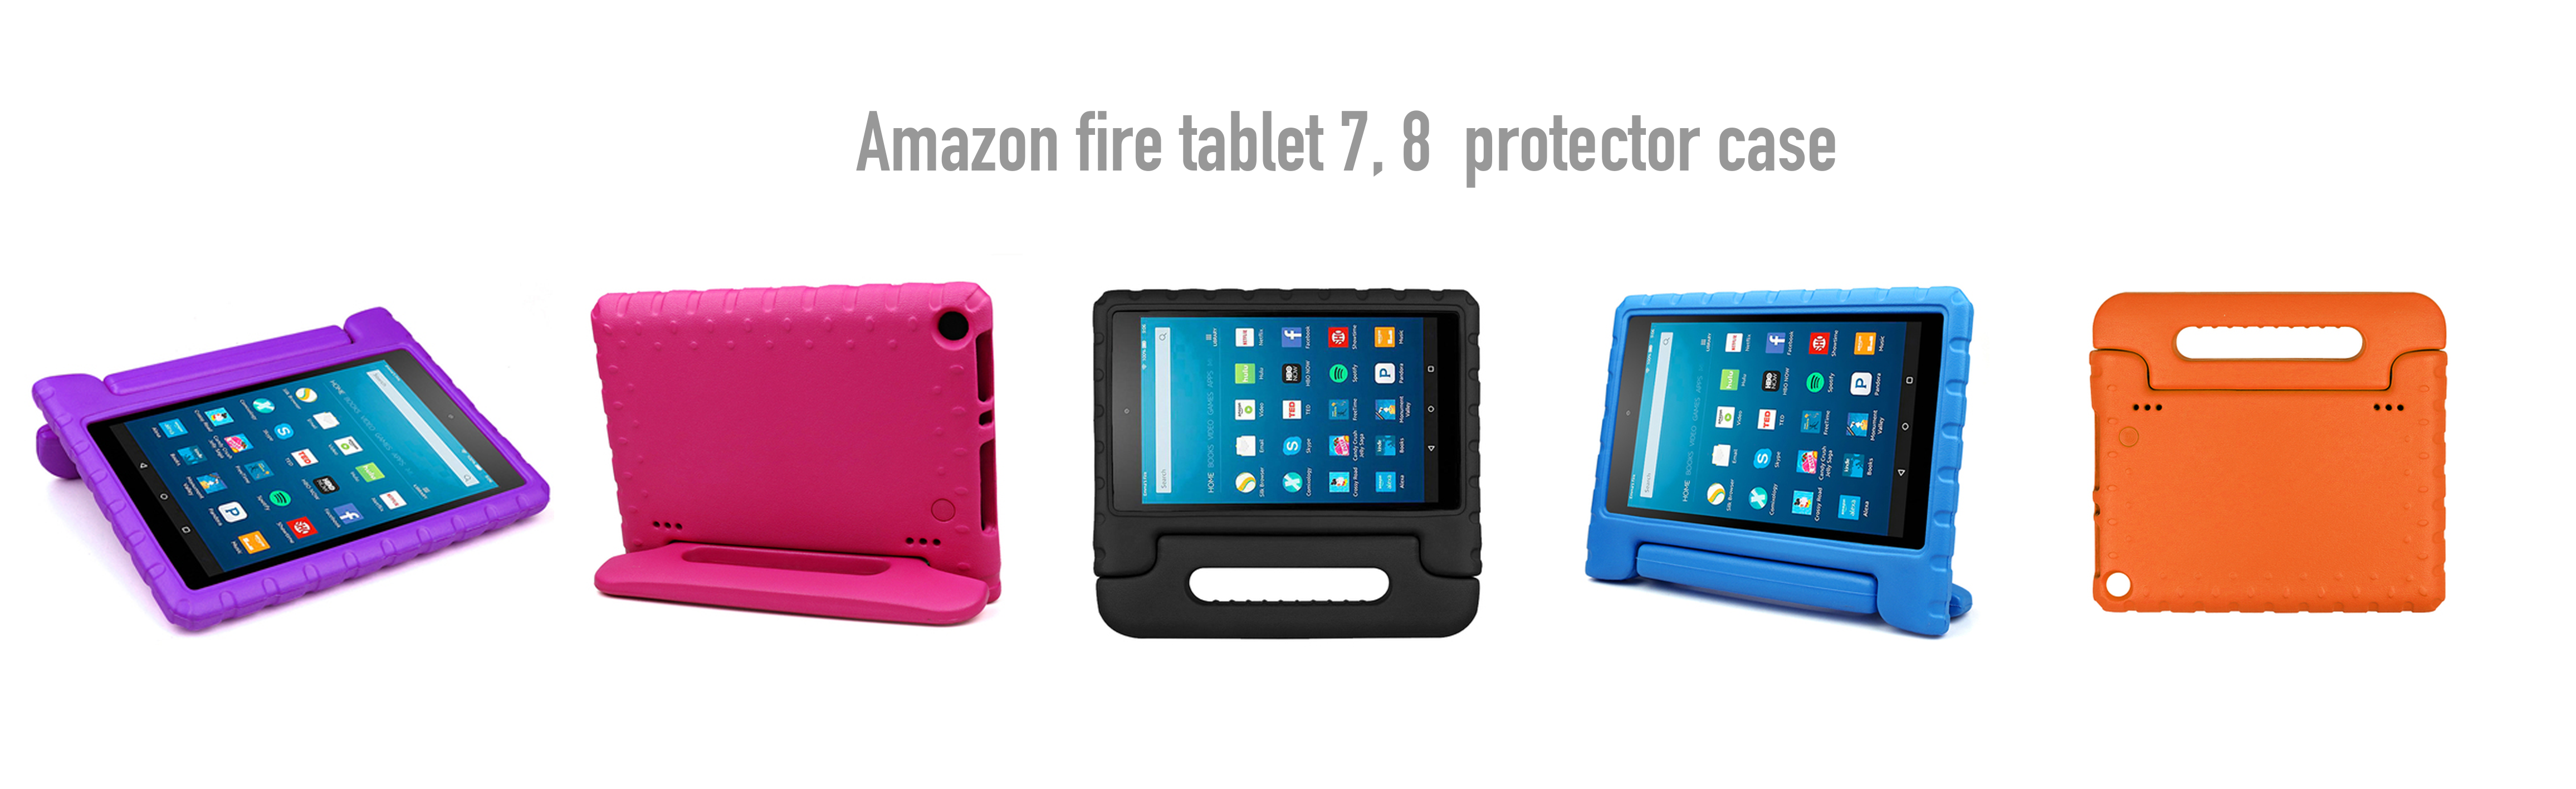 amazon fire tablets protector case